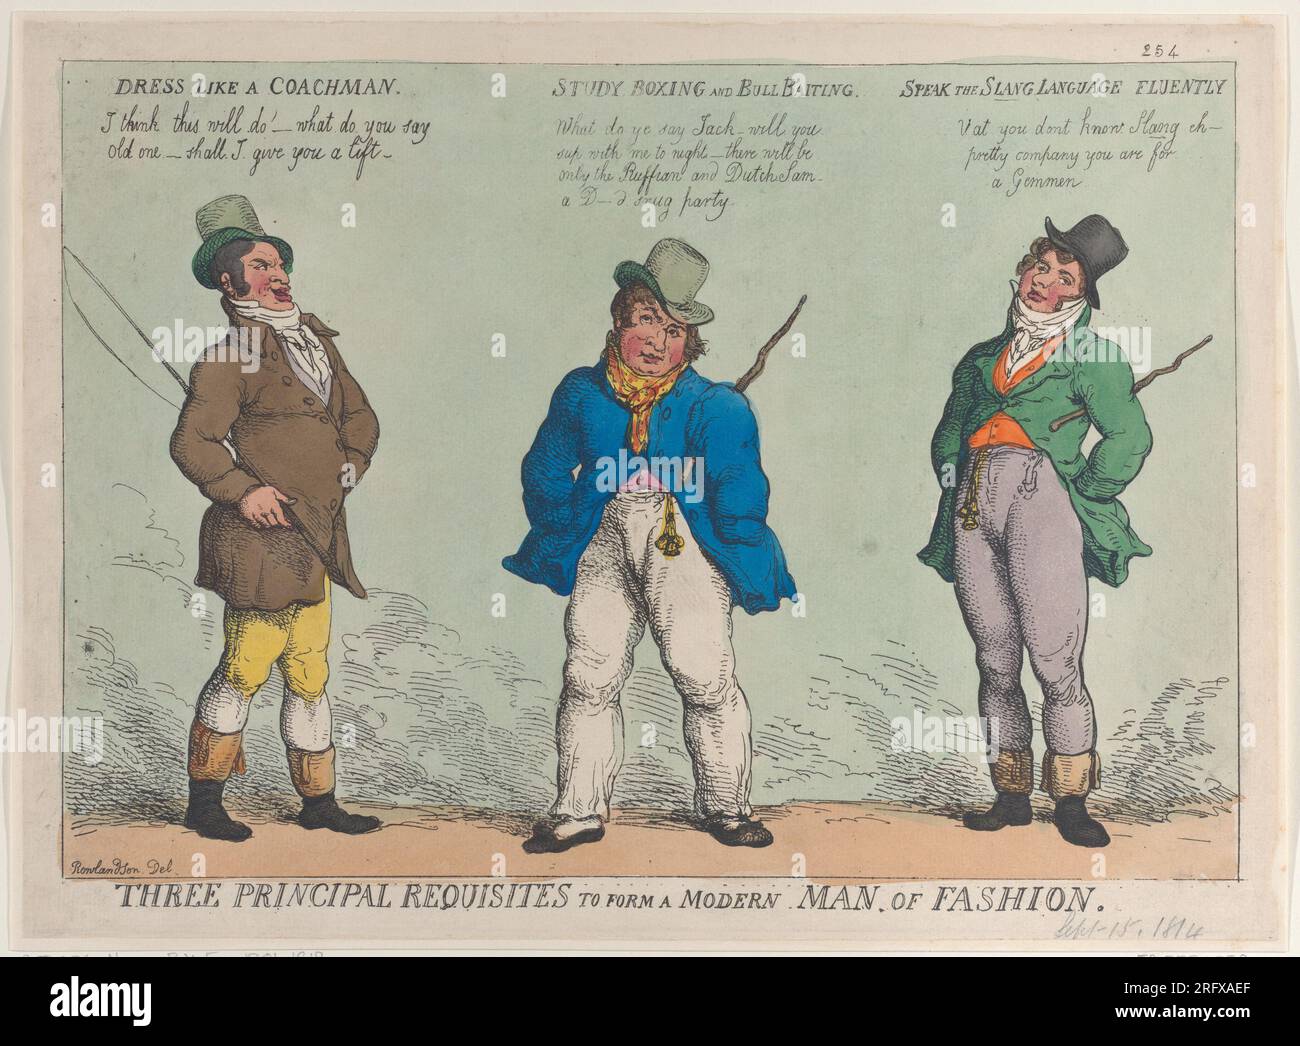 Three Principal Requisites to Form a Modern Man of Fashion 15 September 1814 by Thomas Rowlandson Stock Photo